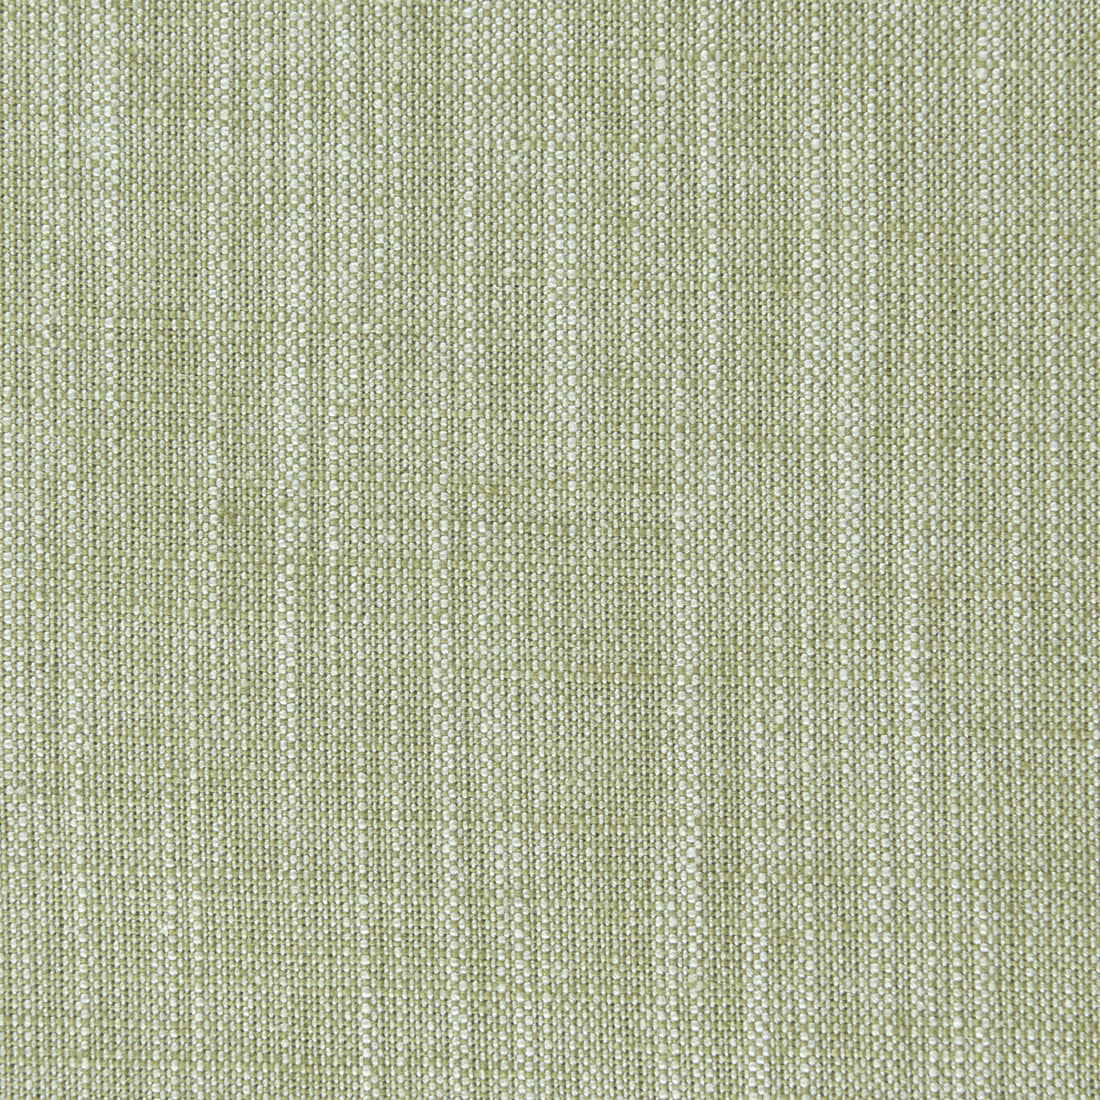 Biarritz fabric in eucalyptus color - pattern F0965/16.CAC.0 - by Clarke And Clarke in the Clarke &amp; Clarke Biarritz collection